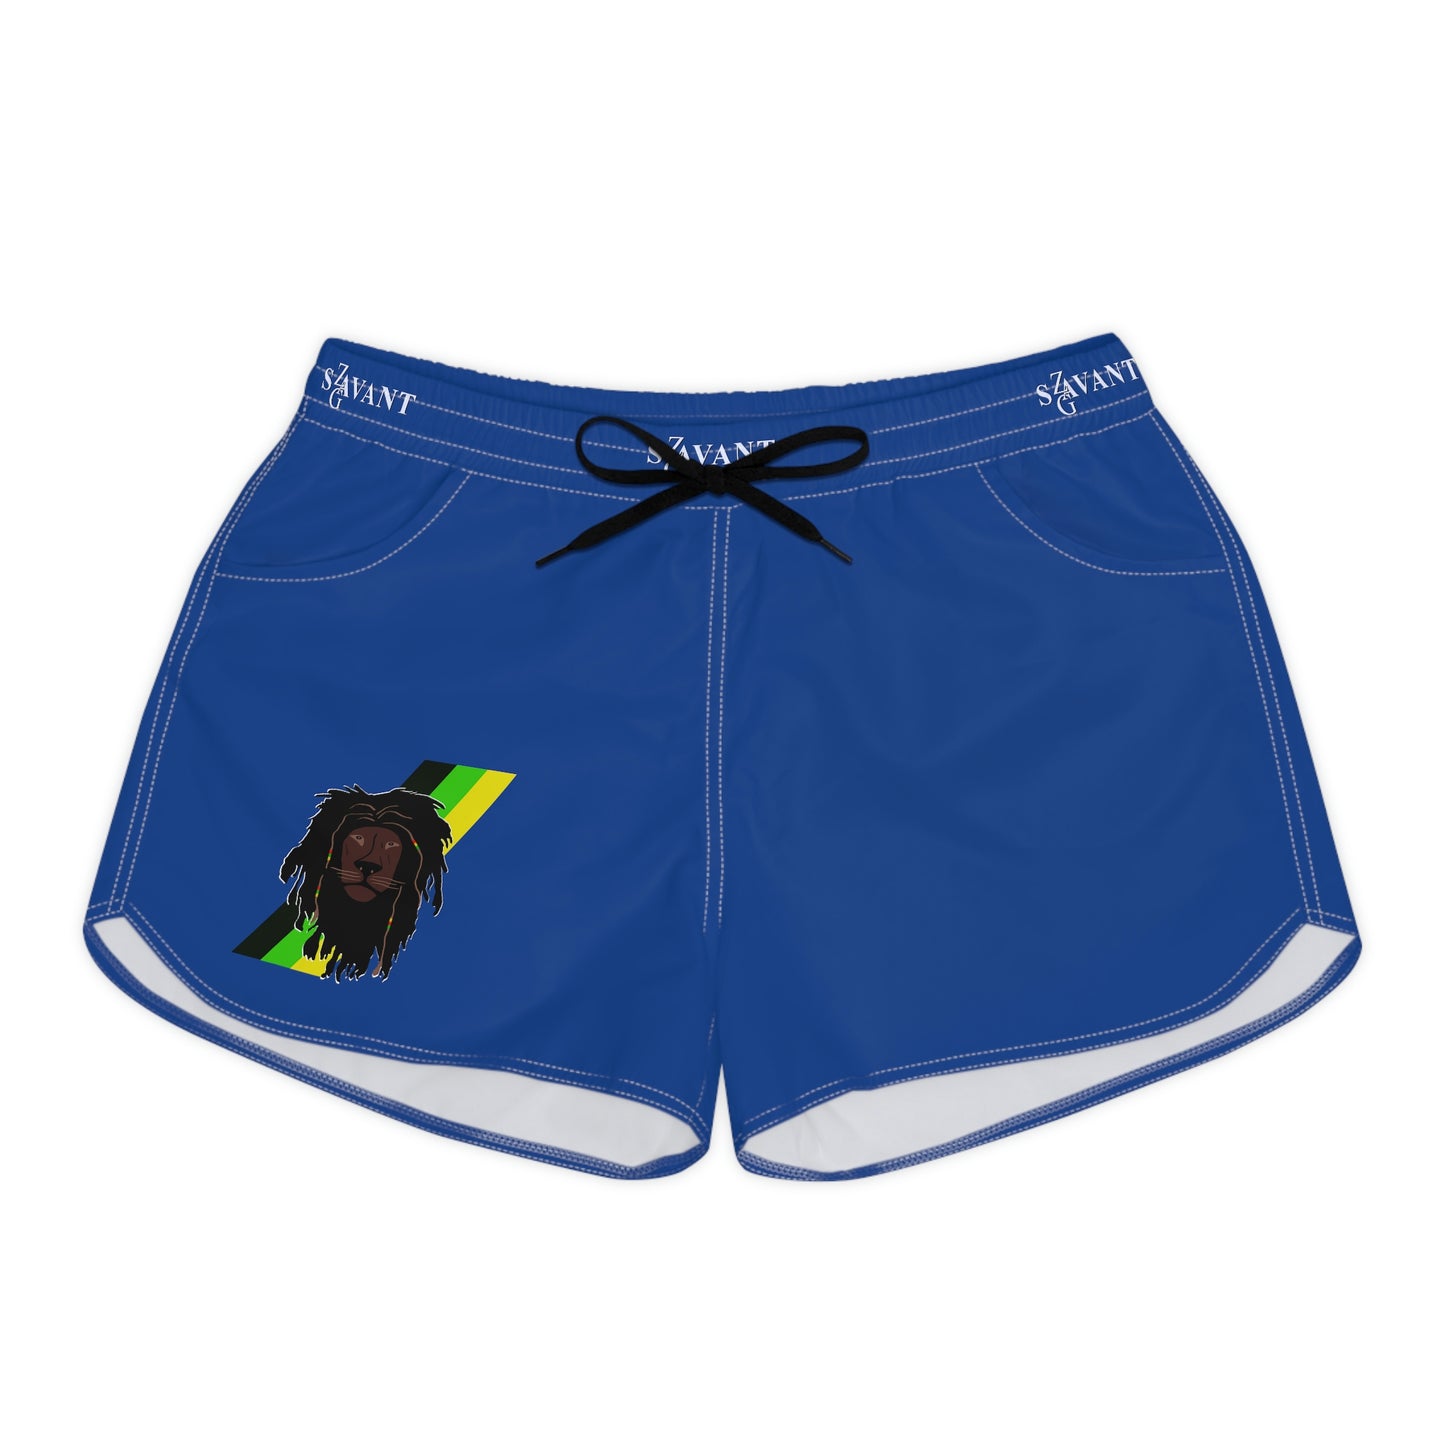 Women's Casual Drawstring Shorts - Blue (With JA Colors)